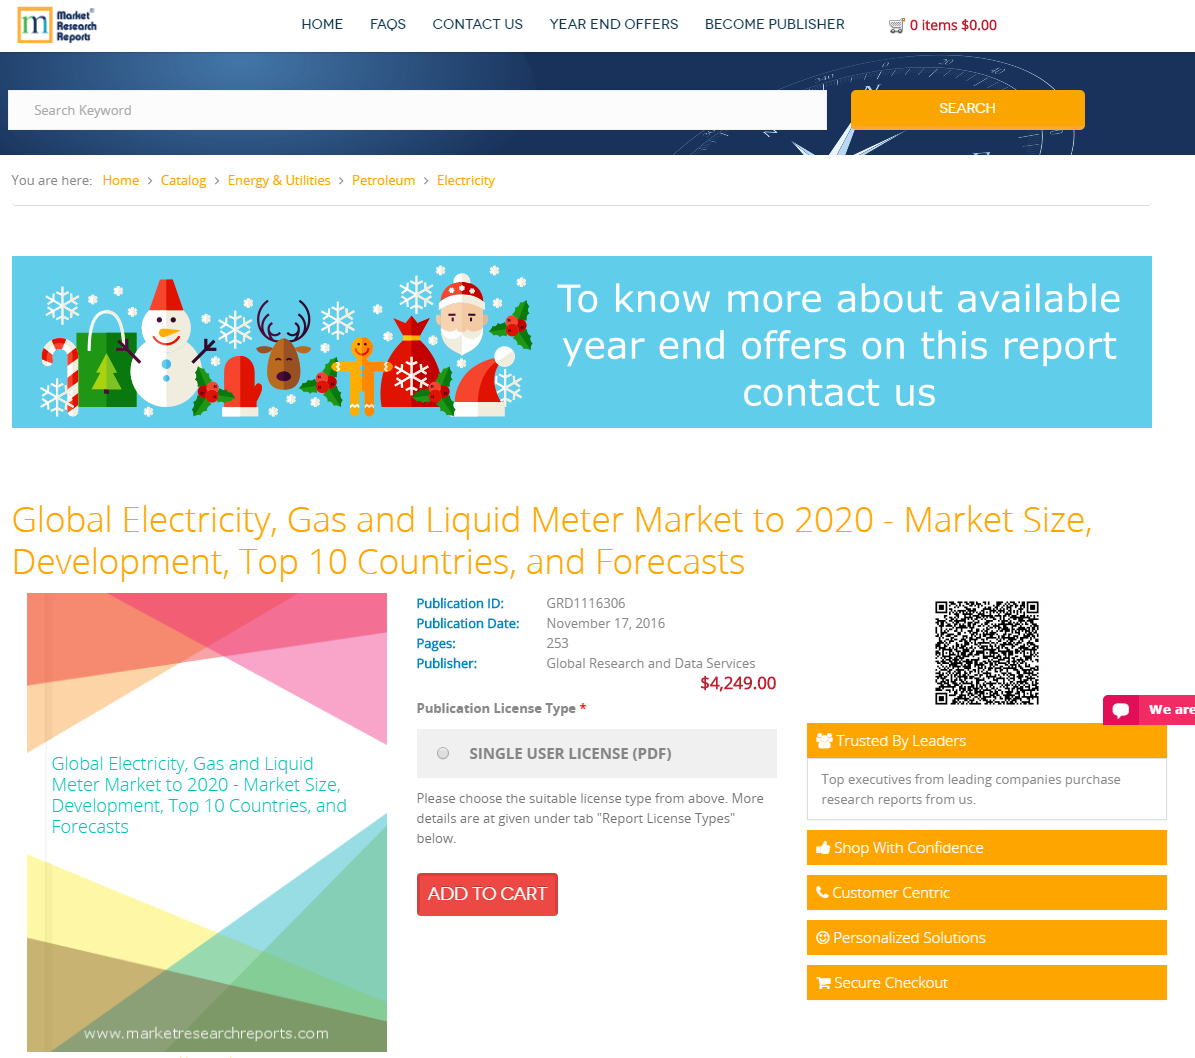 Global Electricity, Gas and Liquid Meter Market to 2020